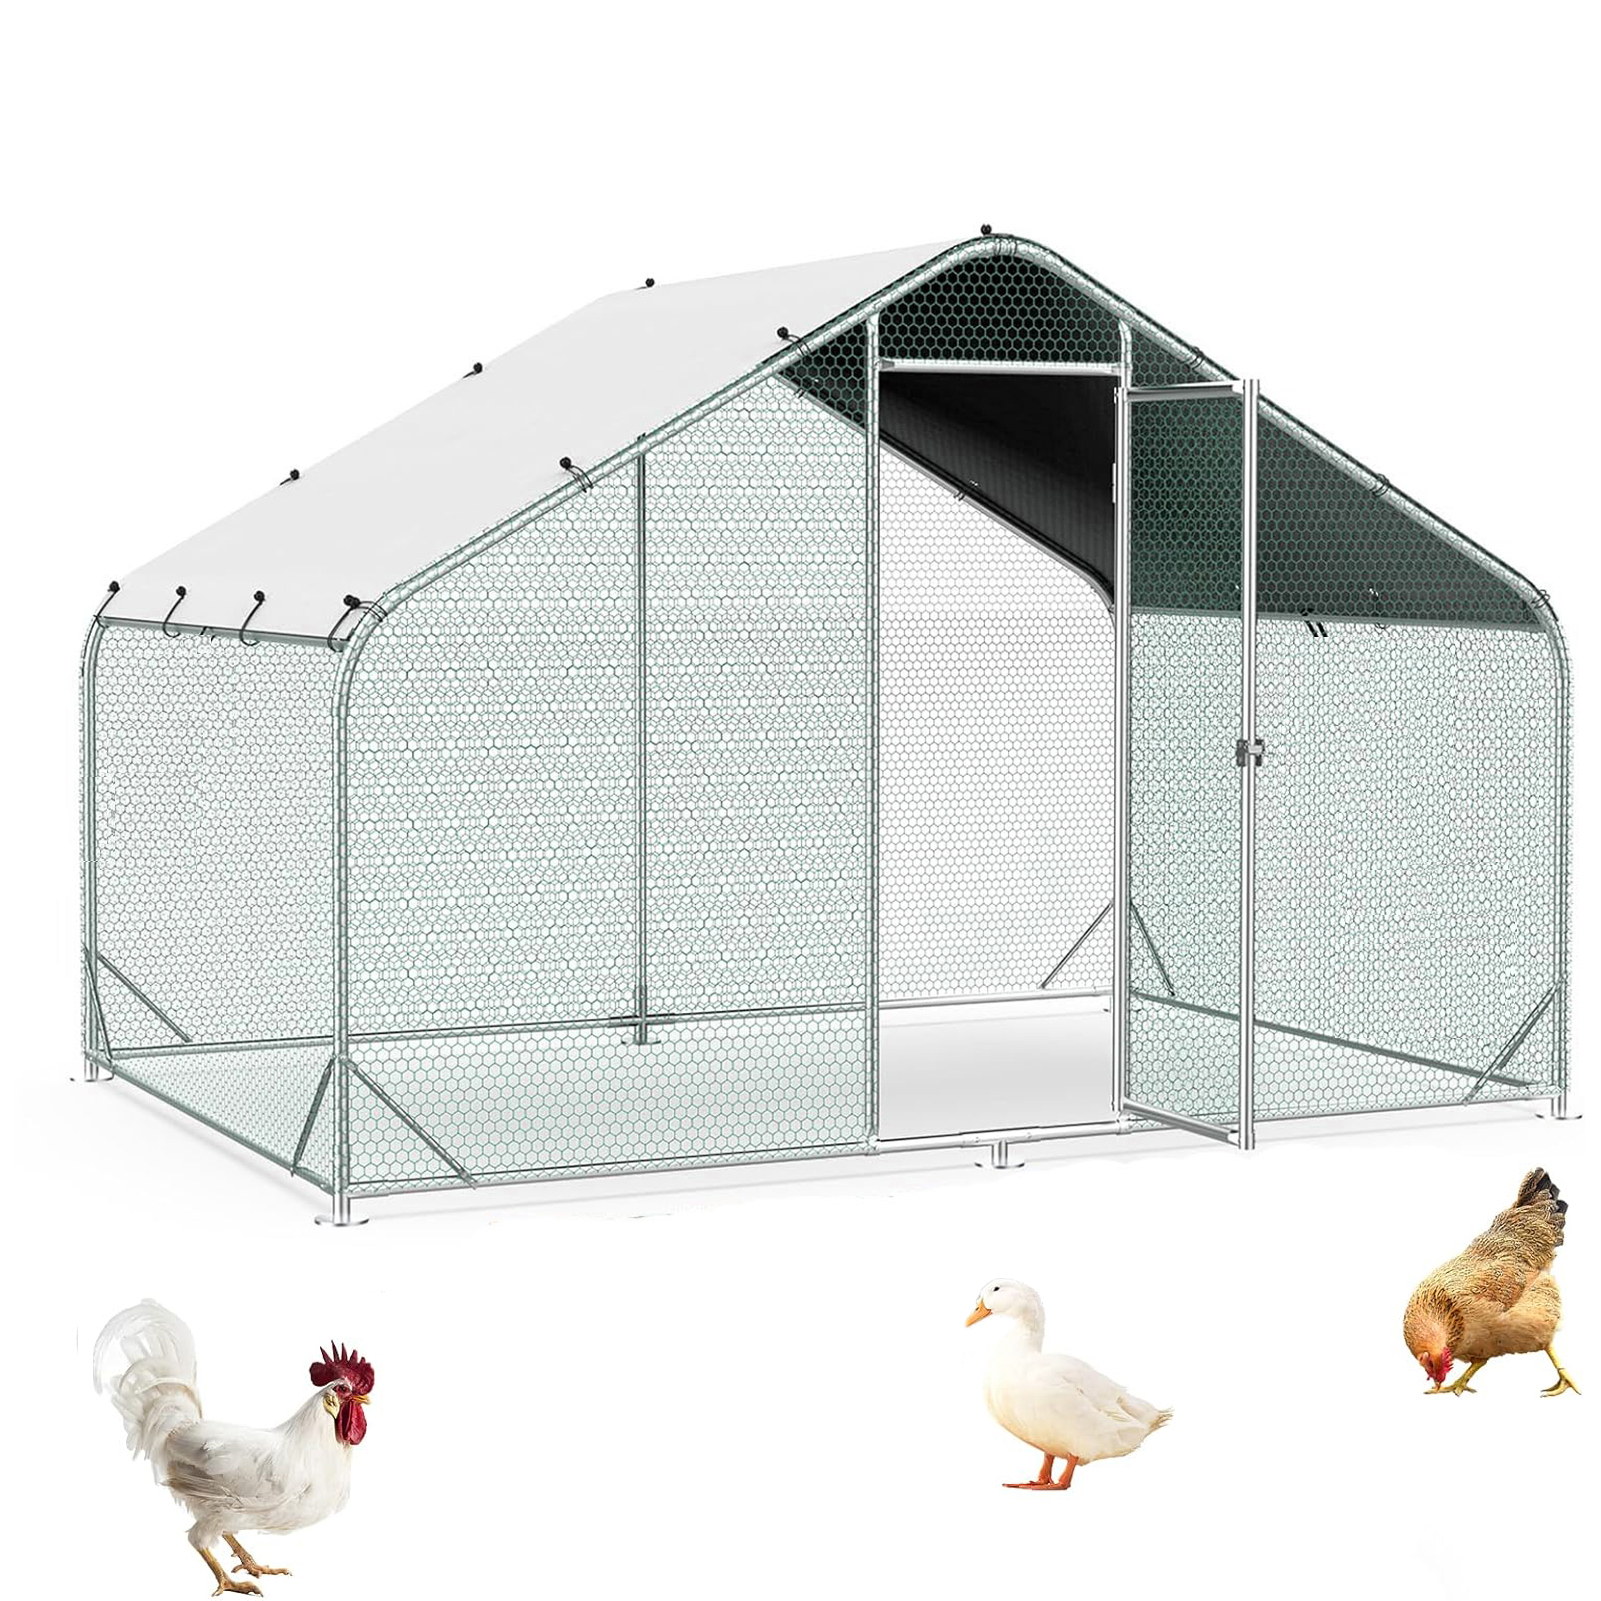 Large Metal Chicken Coops, Outdoor Duck Walk-in Run Poultry Cage, Hen House Yard Habitat Cage with Waterproof Cover Spire Shaped Coop, 9.8' L x 6.6' W x 6.6' H - image 1 of 4